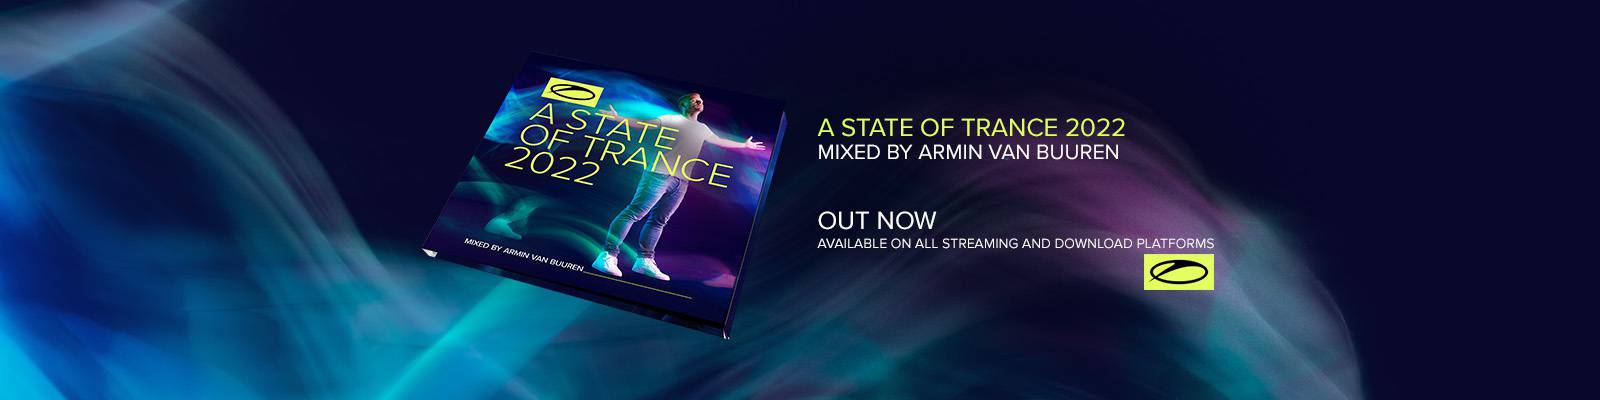 The A State Of Trance 2022 (Mixed by Armin van Buuren) album is Out Now!